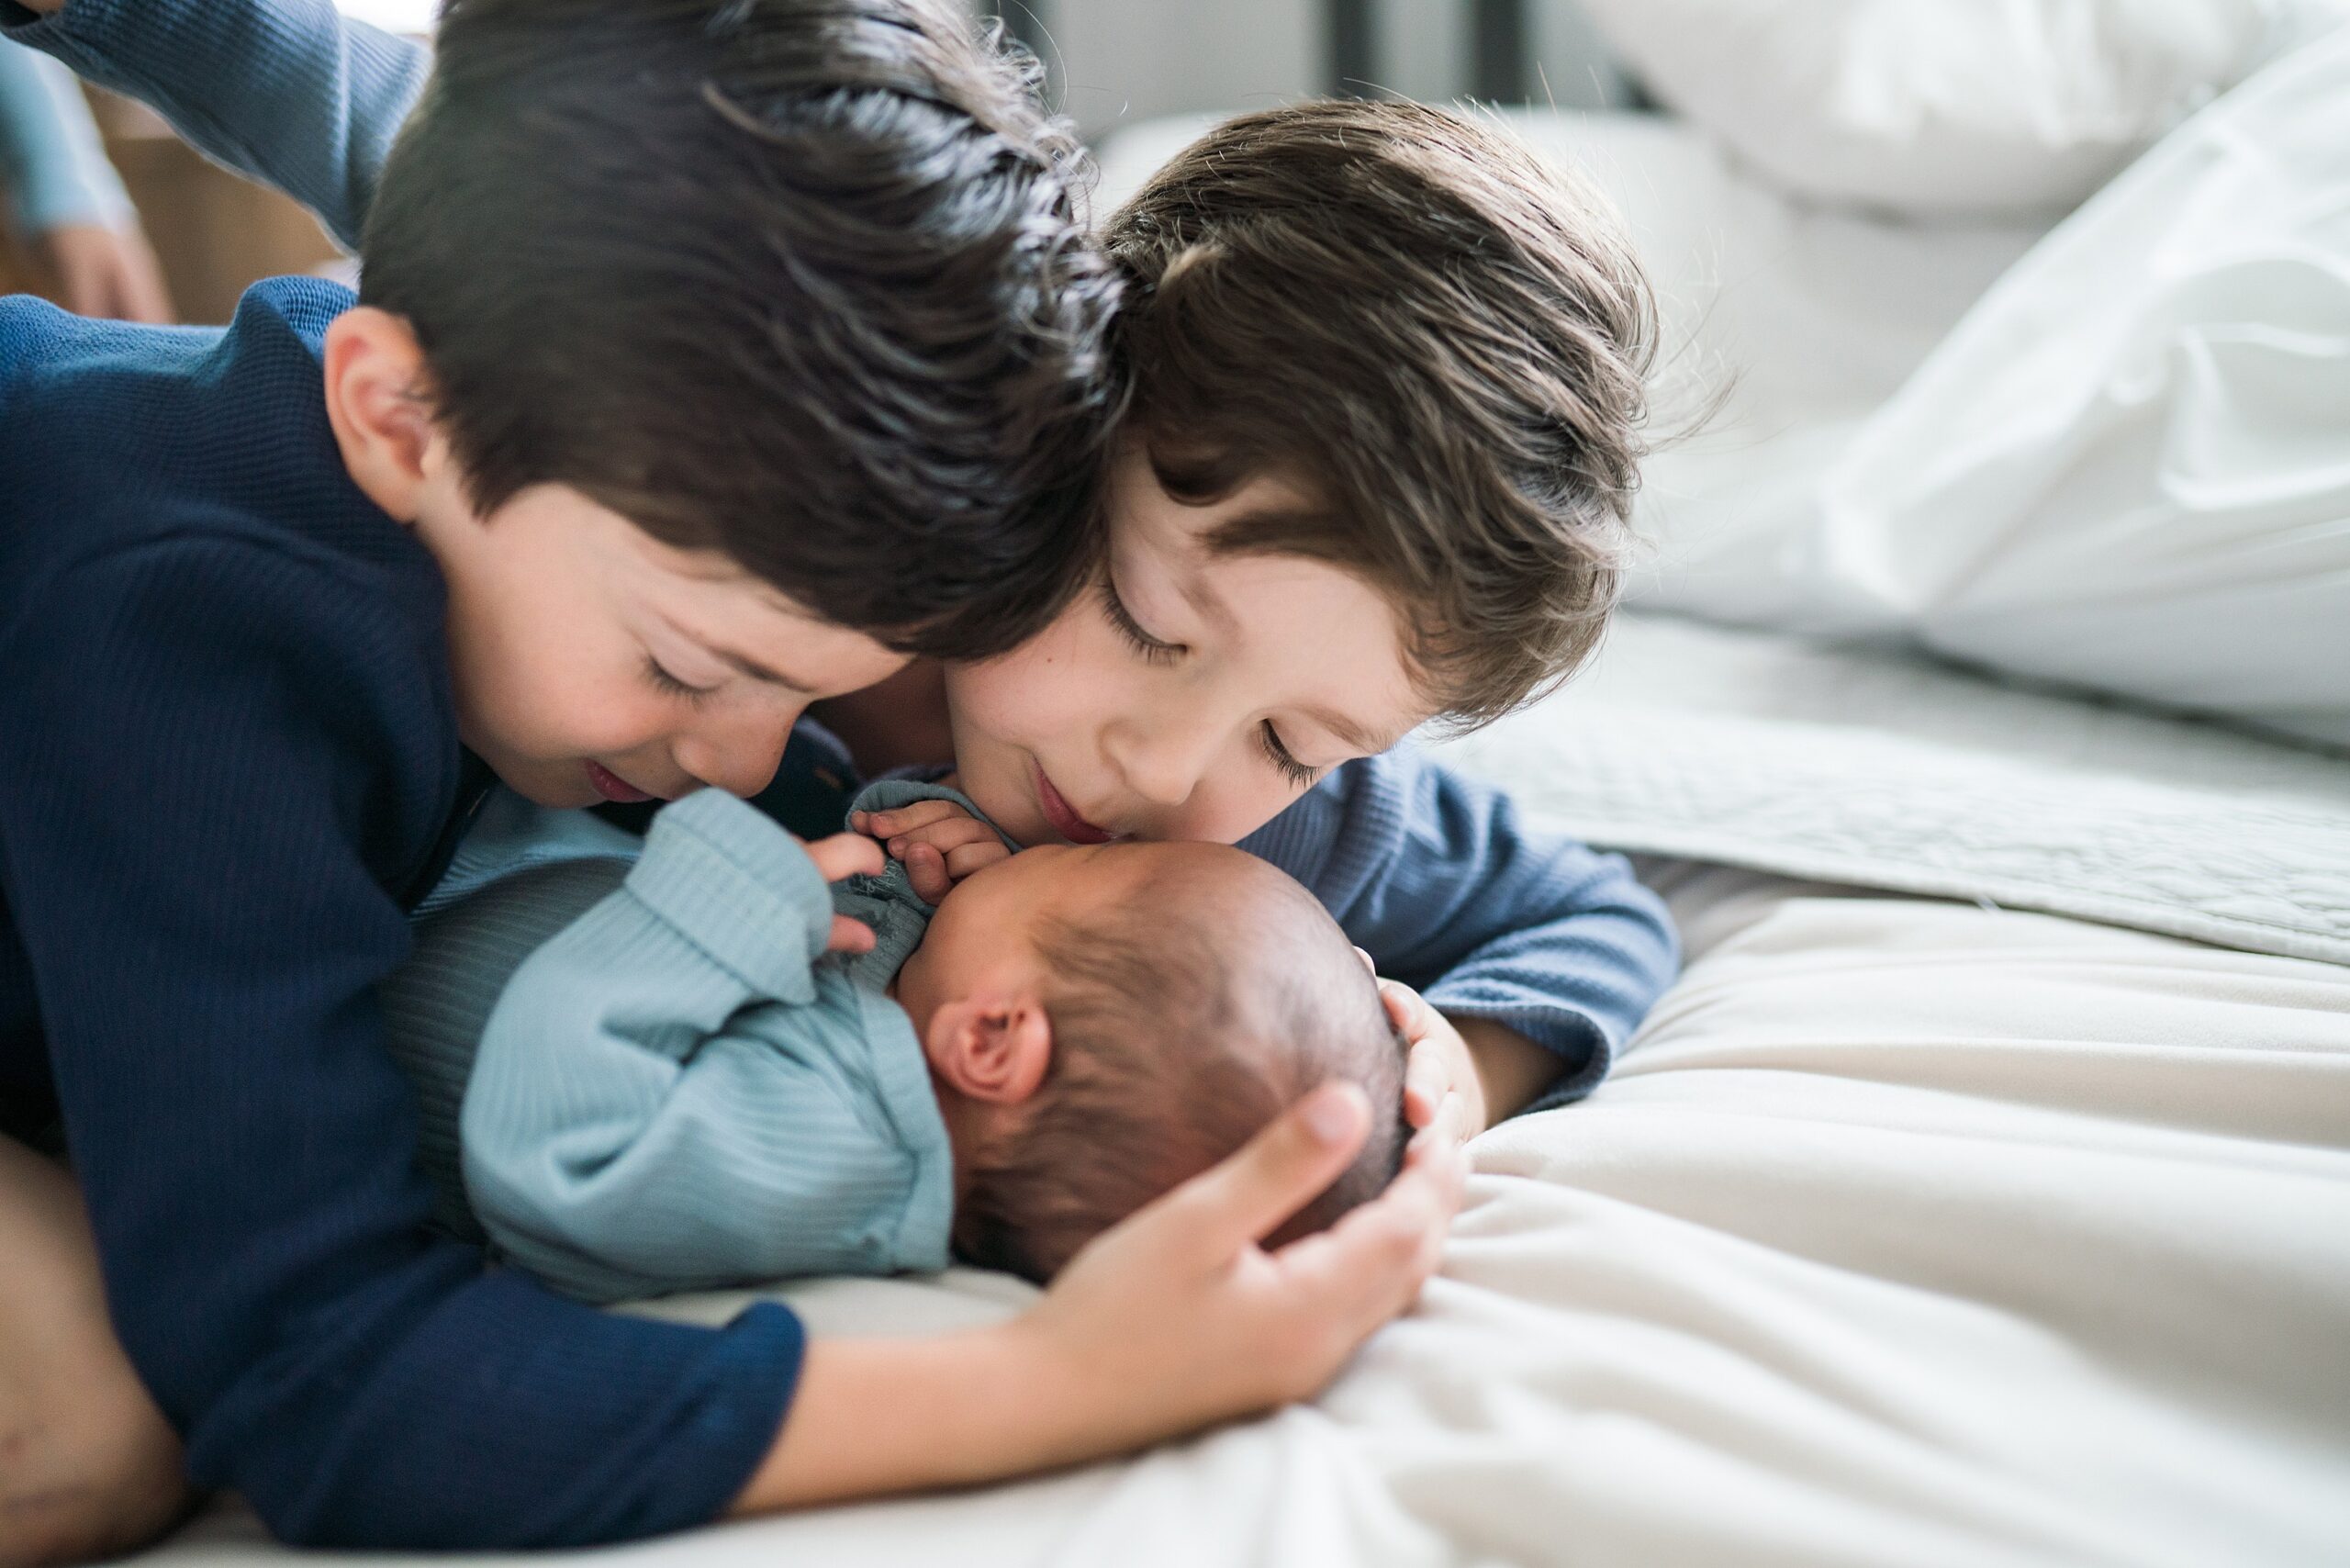 Sibling portraits during newborn photo session, 2 brothers snuggling newborn baby brother